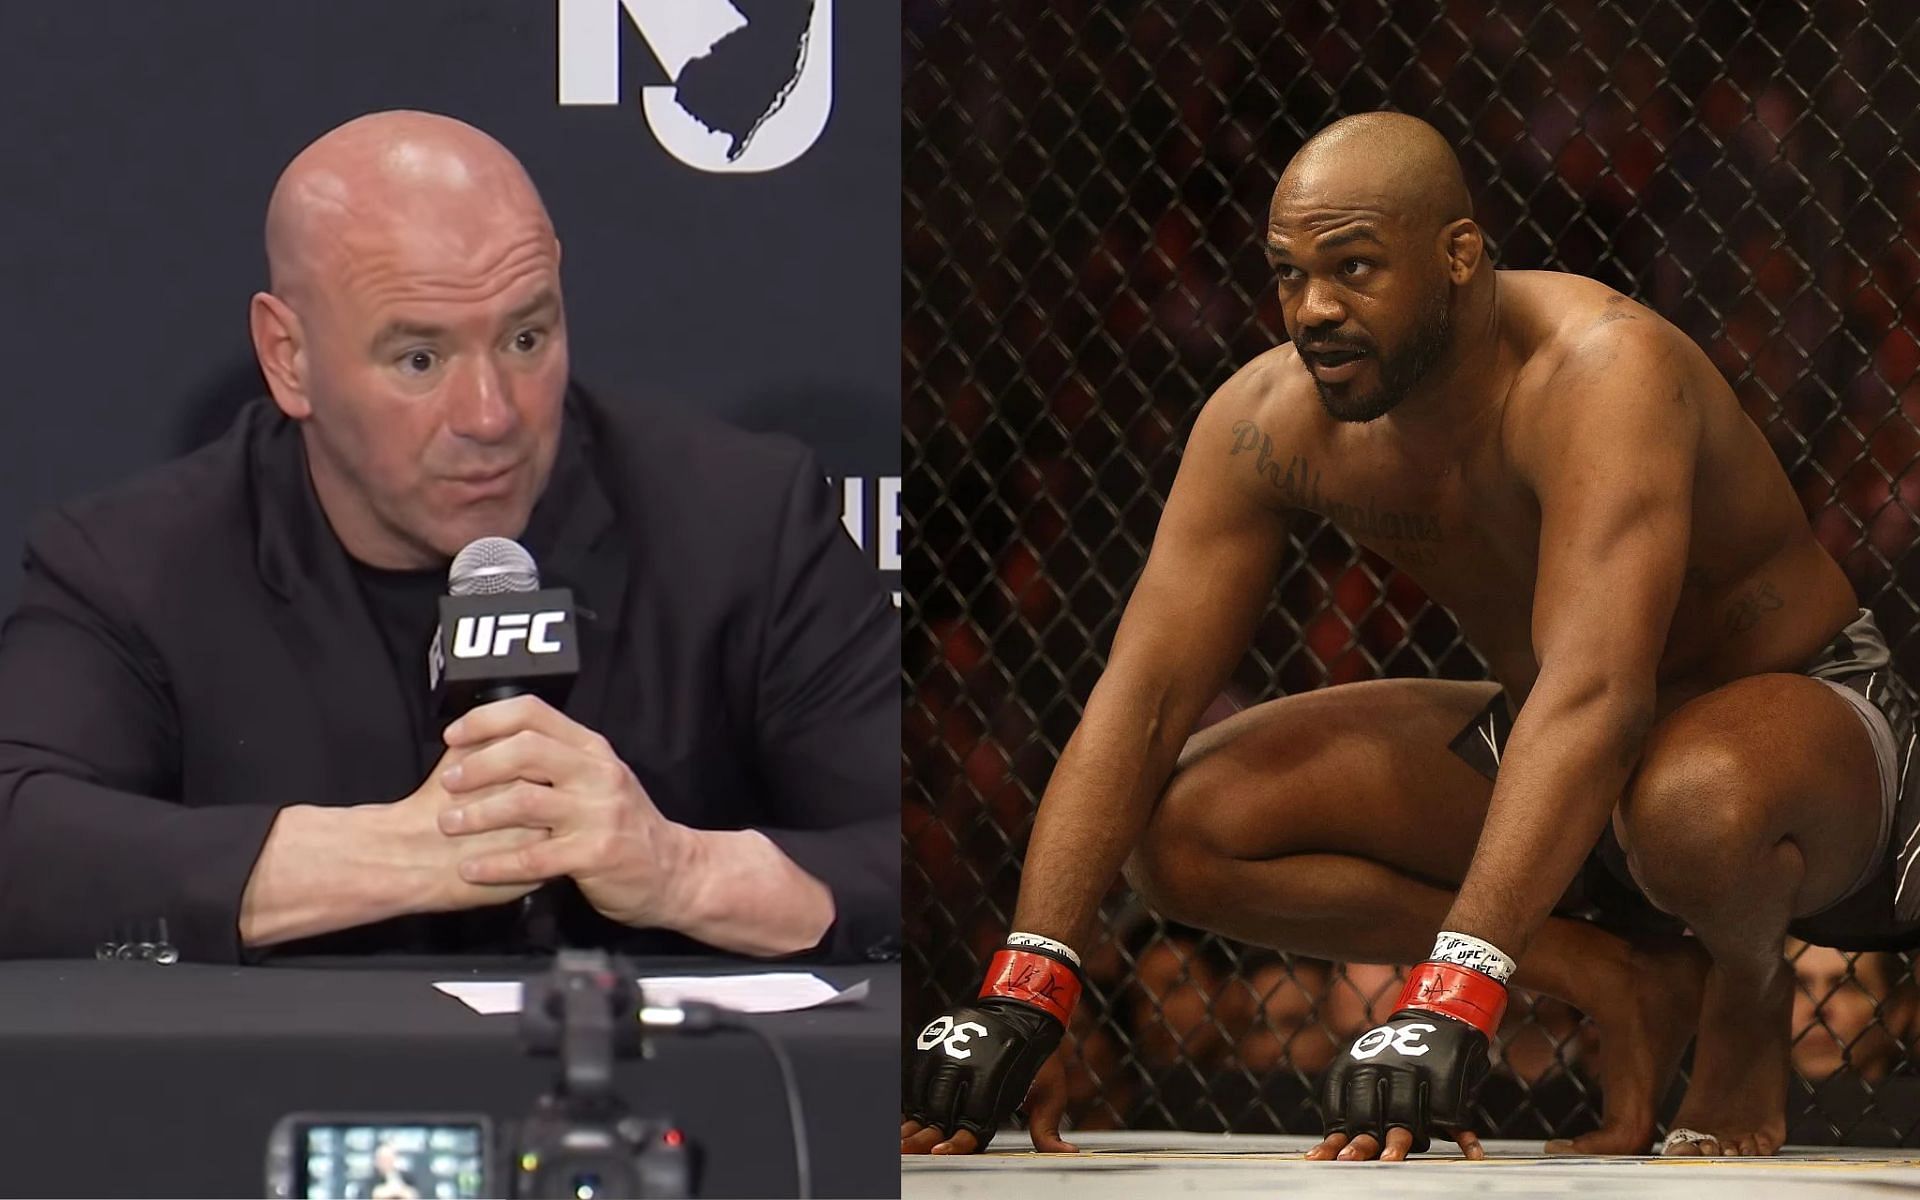 Dana White (left) labels Jon Jones (right) as the GOAT of any combat sport athlete in epic rant [Images courtesy: Getty Images and @ufc on YouTube]